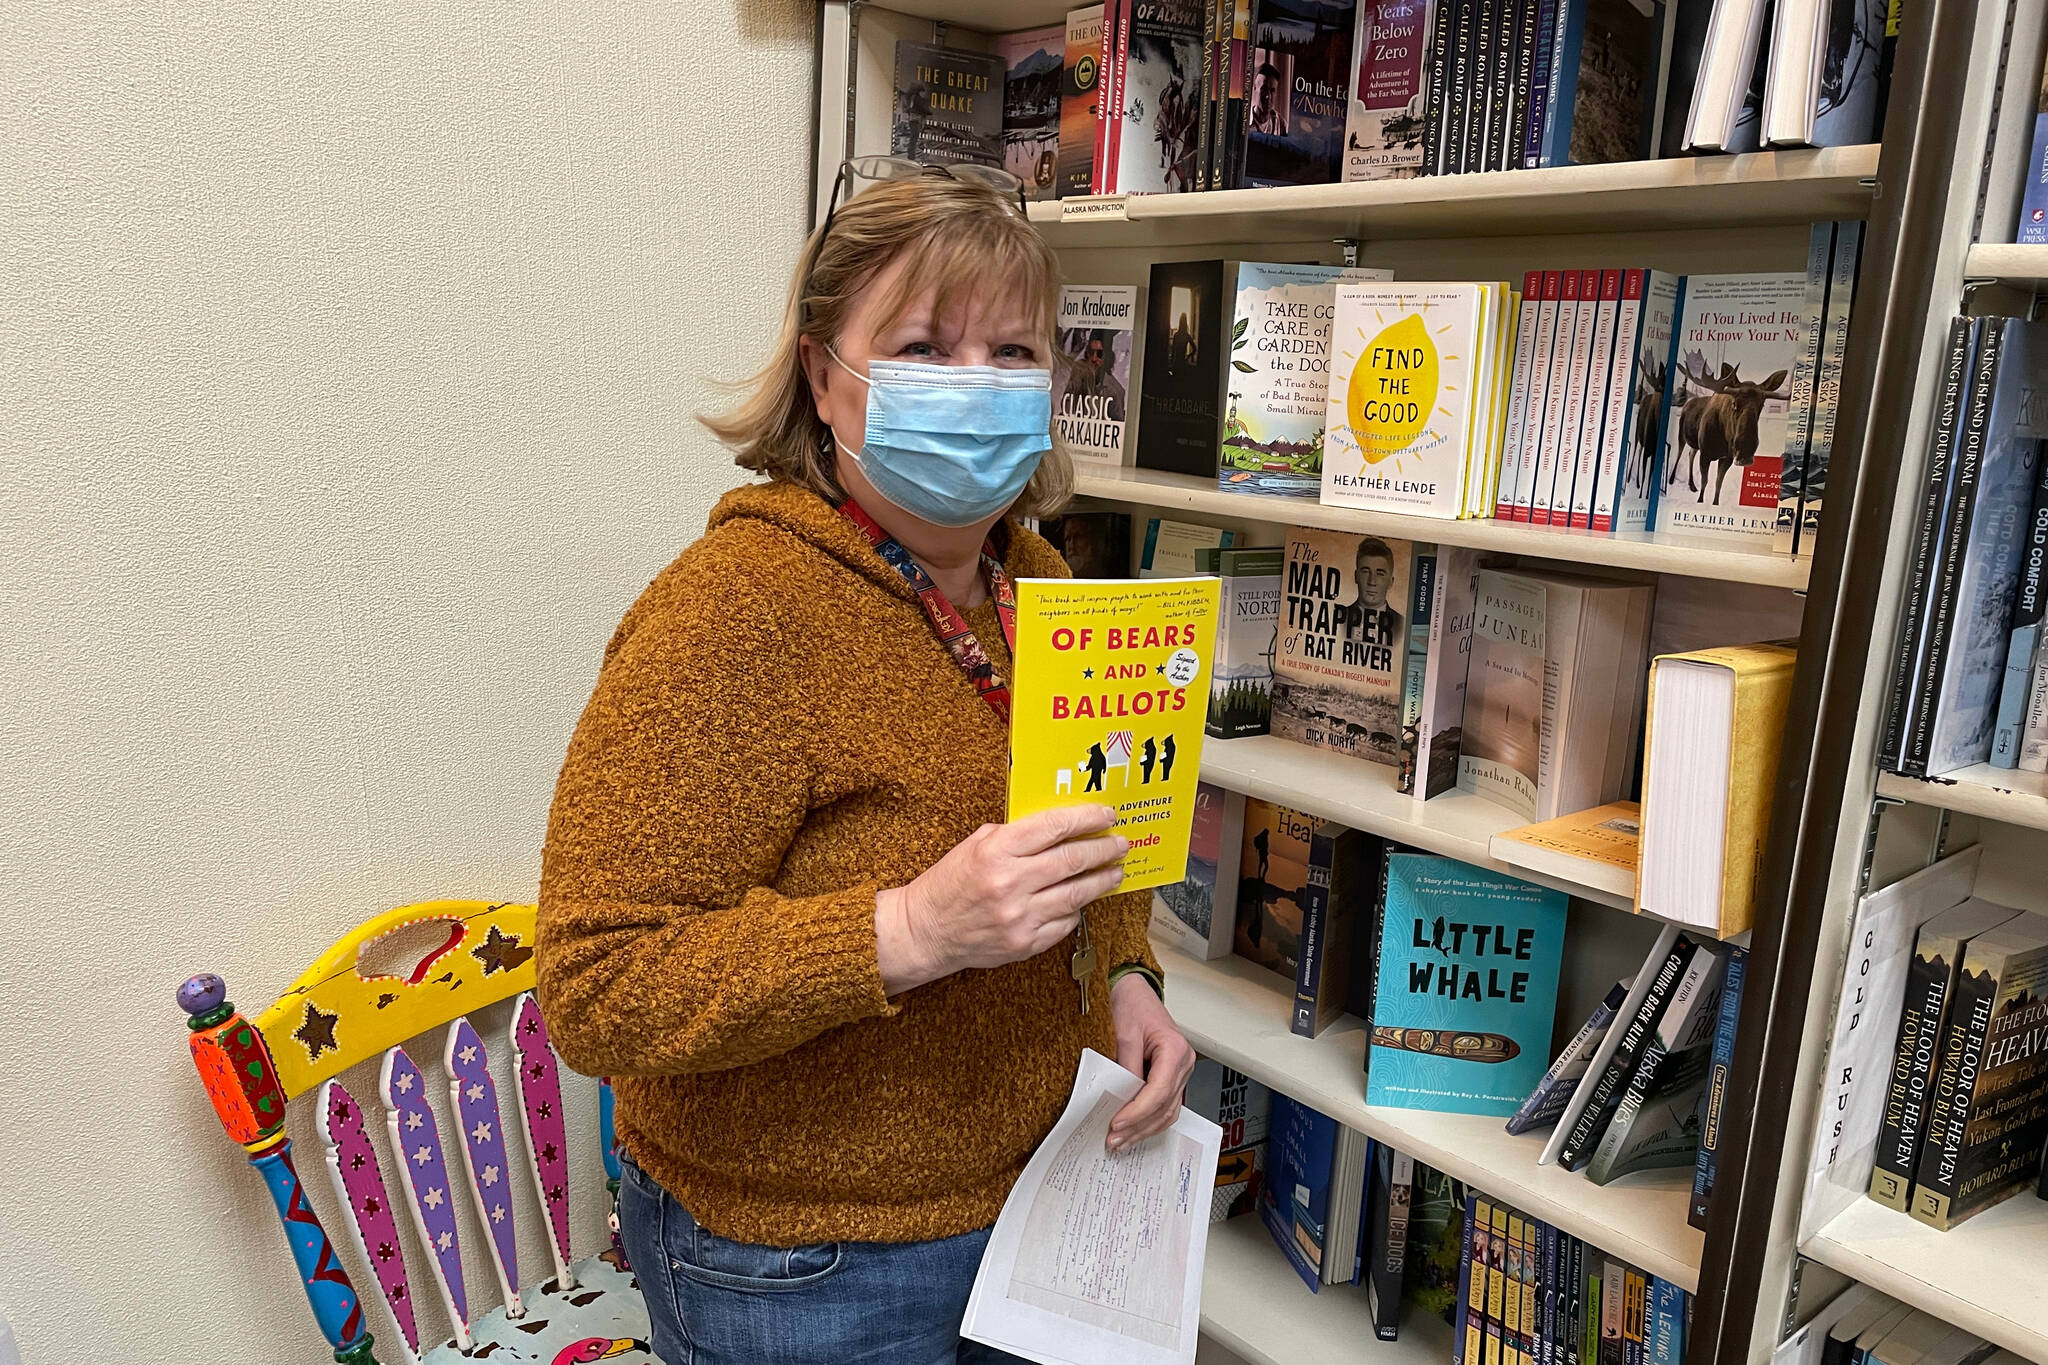 Brenda Weaver, owner of Hearthside Books and Toys, holds up the most recent book by Heather Lende, recently chosen as the Alaska State Writer Lauereate. (Michael S. Lockett / Juneau Empire)